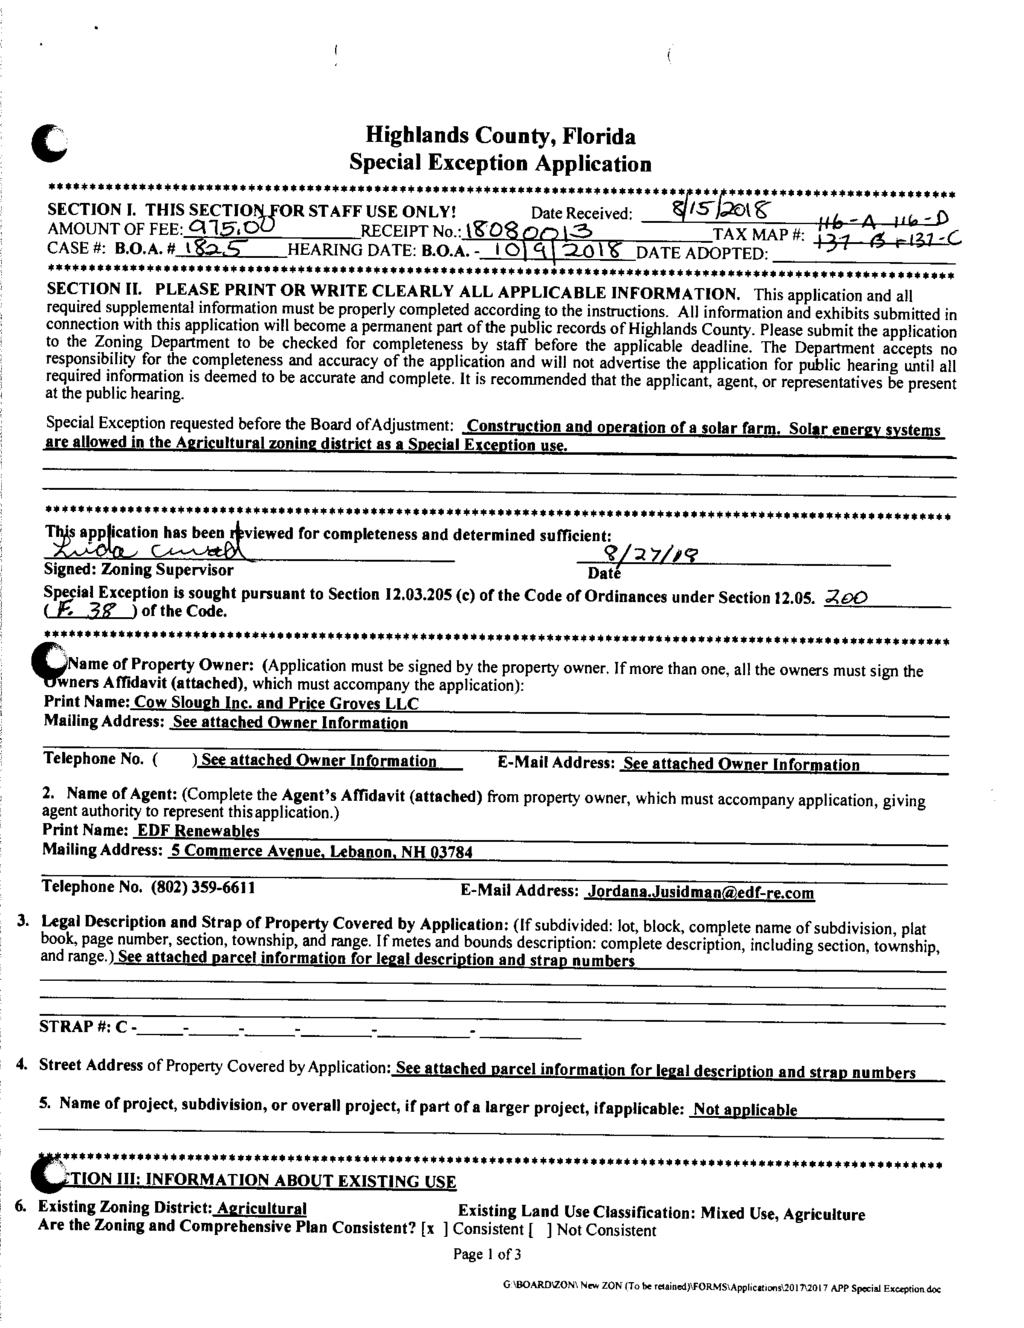 Highlands County, Florida Special Exception Application **************************************************************************** ***'-*************************** SECTION I. THIS SECTIO!